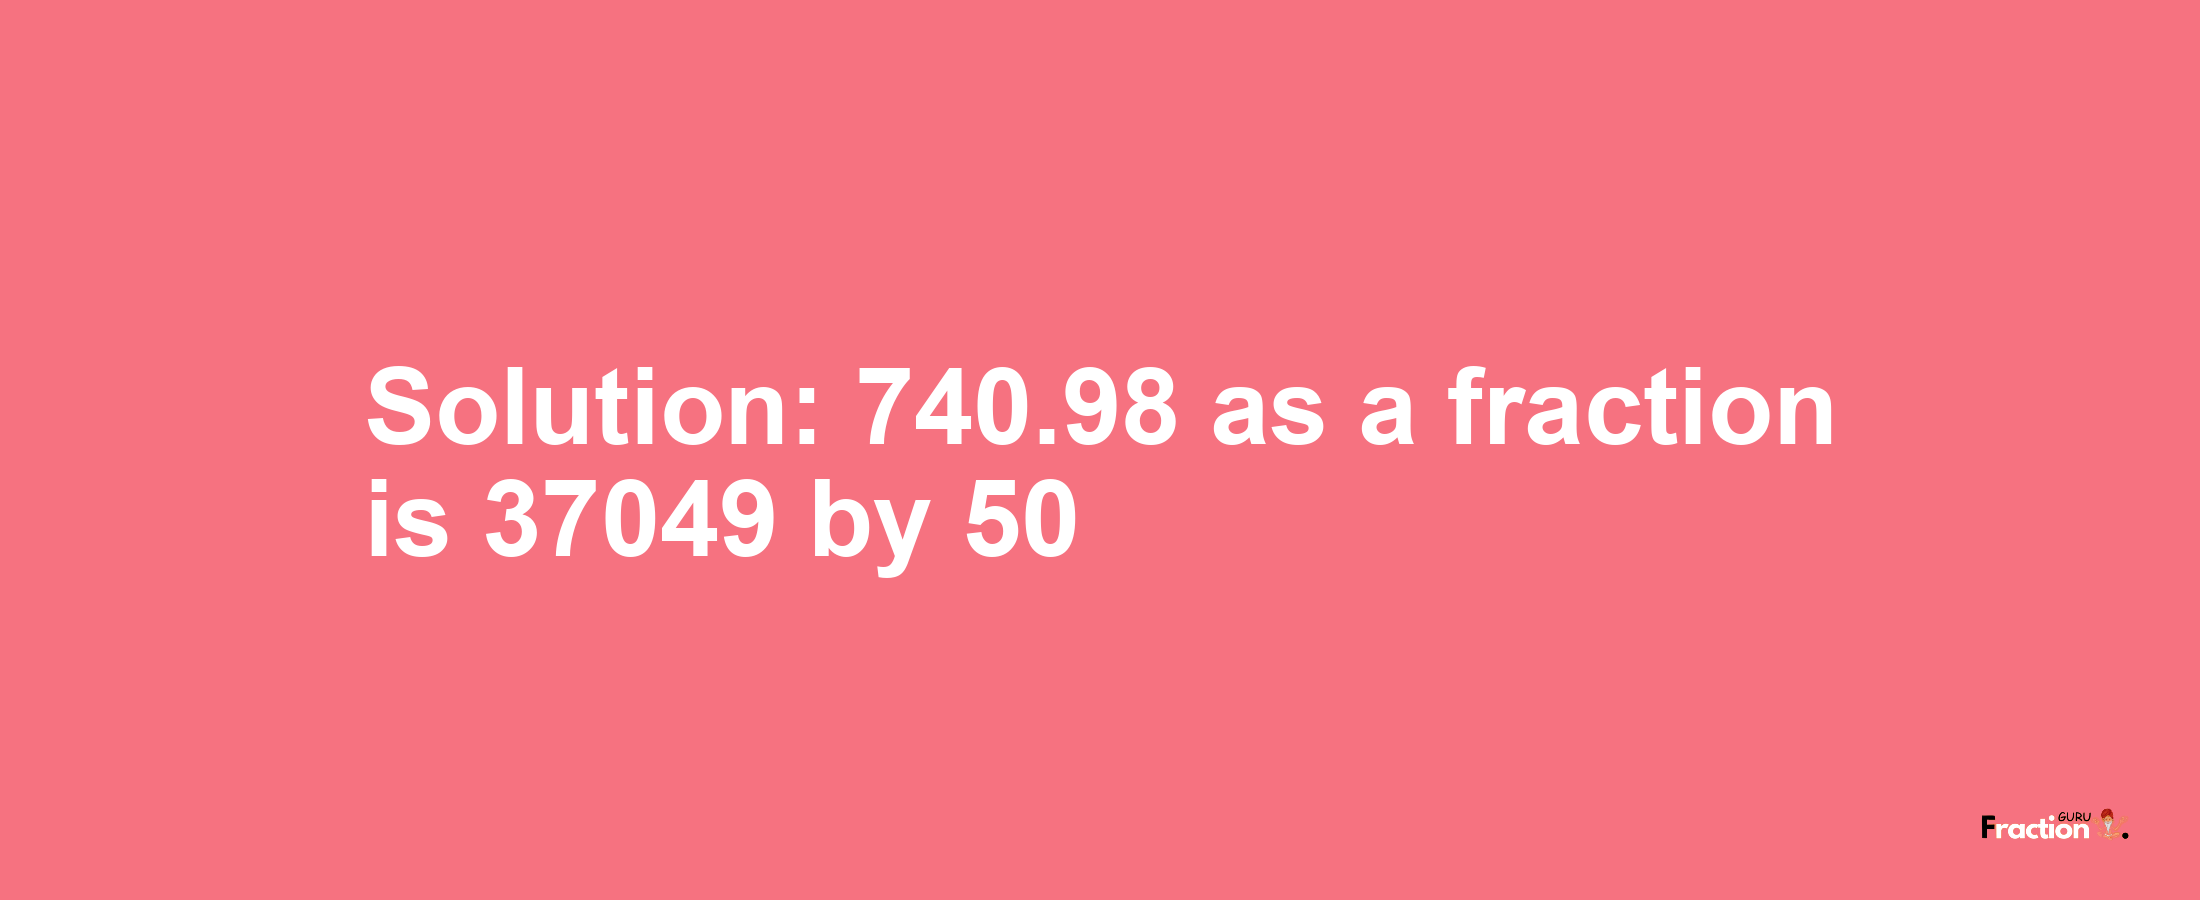 Solution:740.98 as a fraction is 37049/50